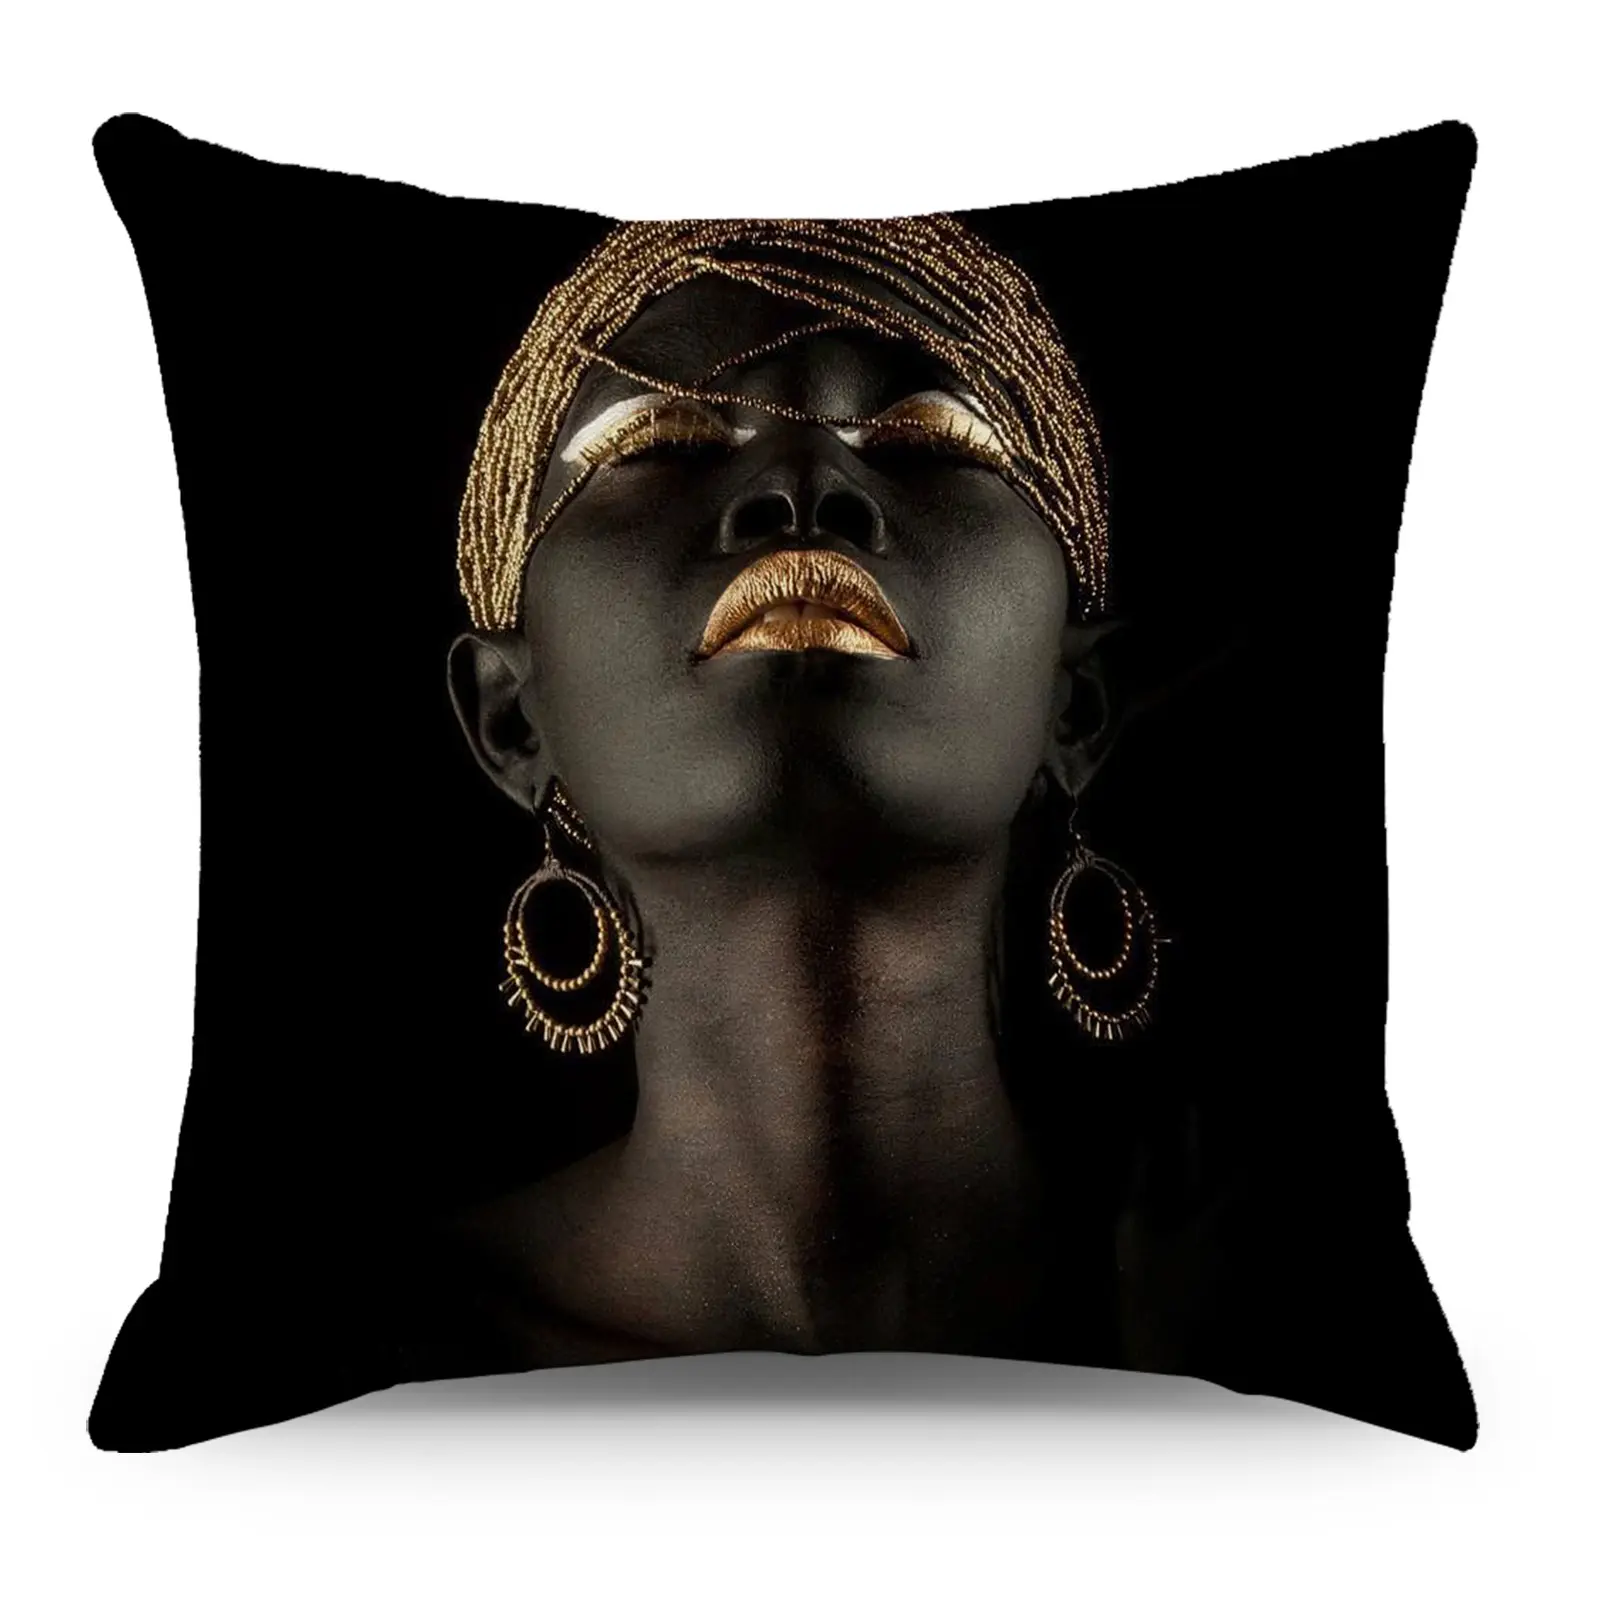 Luxury Black Gold Artistic Beauty Throw Pillow Case American Girl African Woman Pillow cover Abstract Cushion cover for Sofa